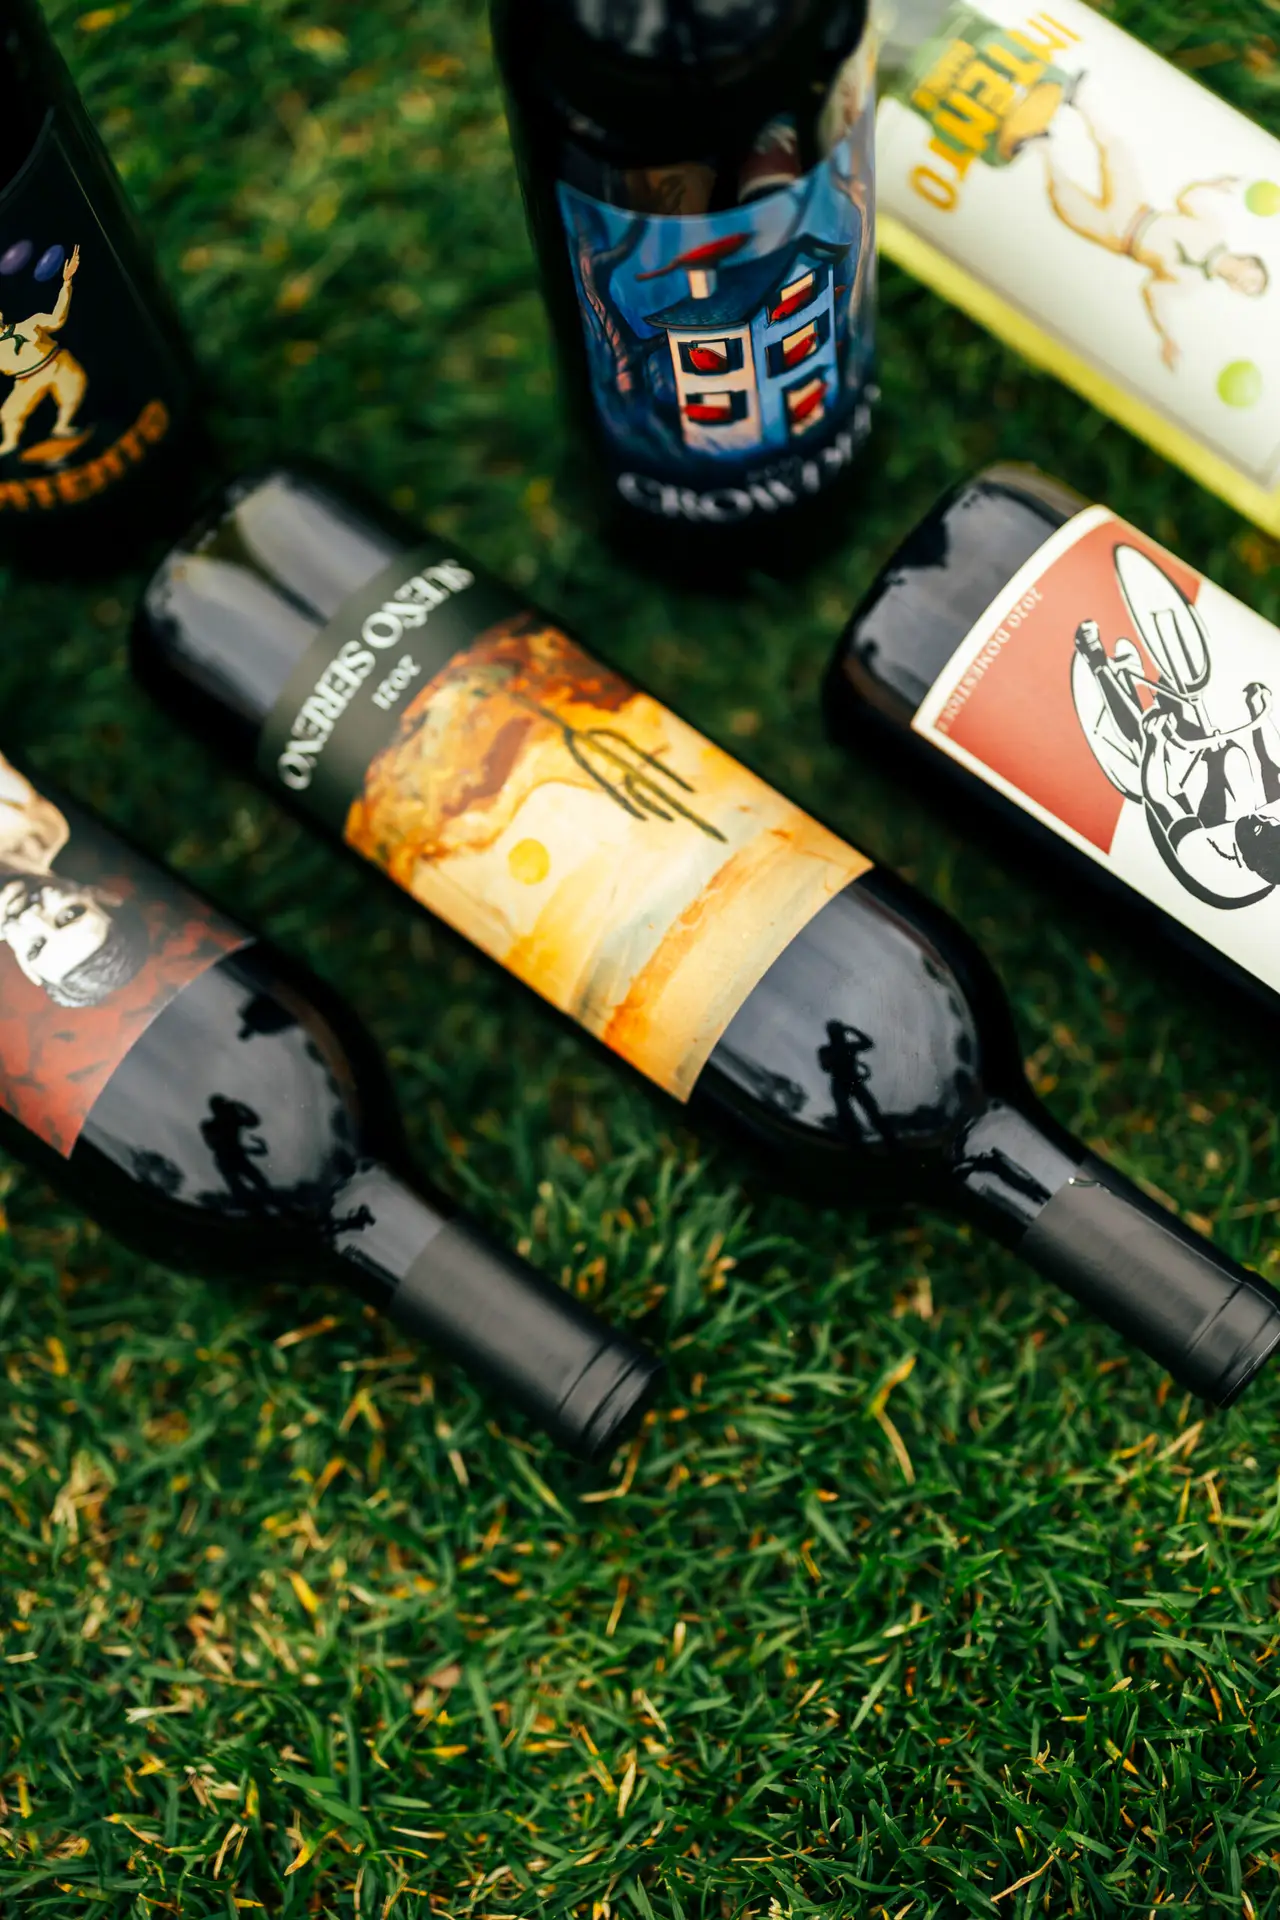 artwork portrayed on wine bottle labels laid across a grass area